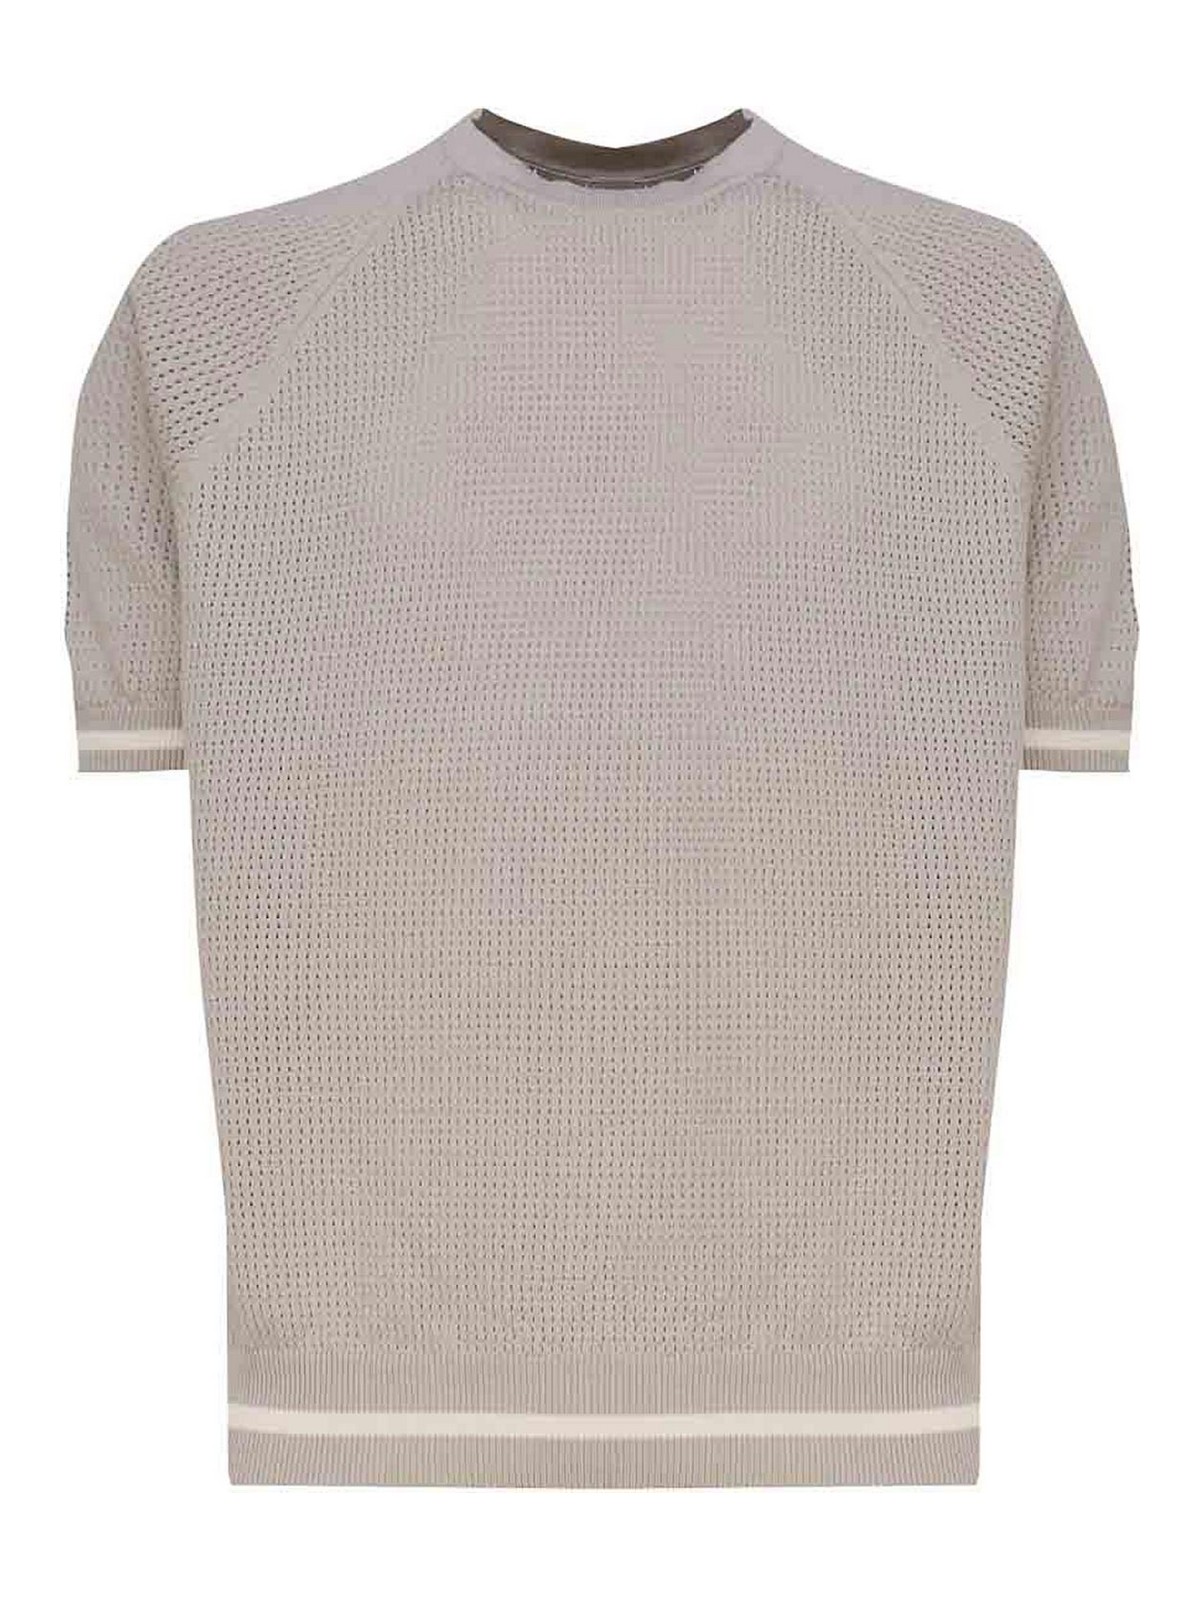 ELEVENTY BEIGE KNITTED TOP